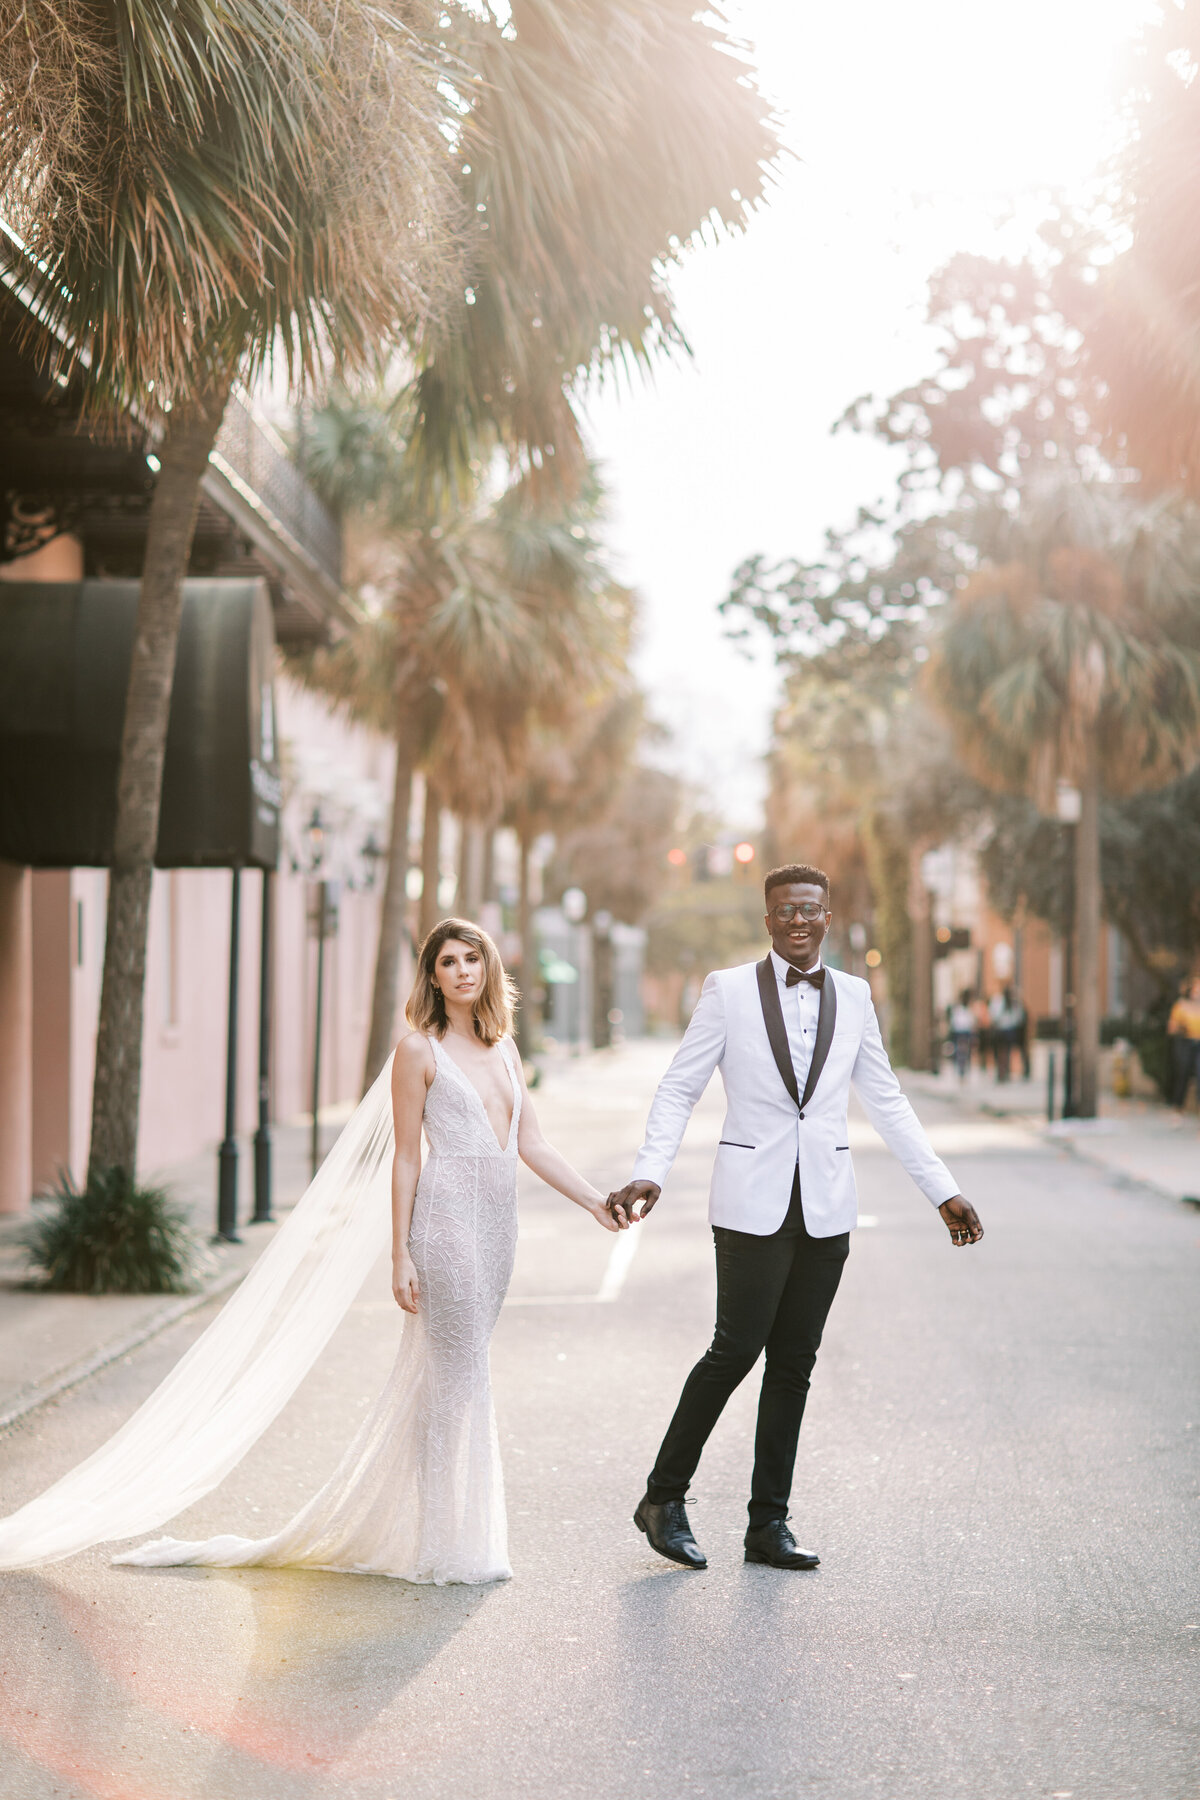 Gorgeous portrait of a young bride in a wedding gown holding the hand of a handsome groom in a white tuxedo with black lapels walking across the street in Charleston with the sunset glowing behind them